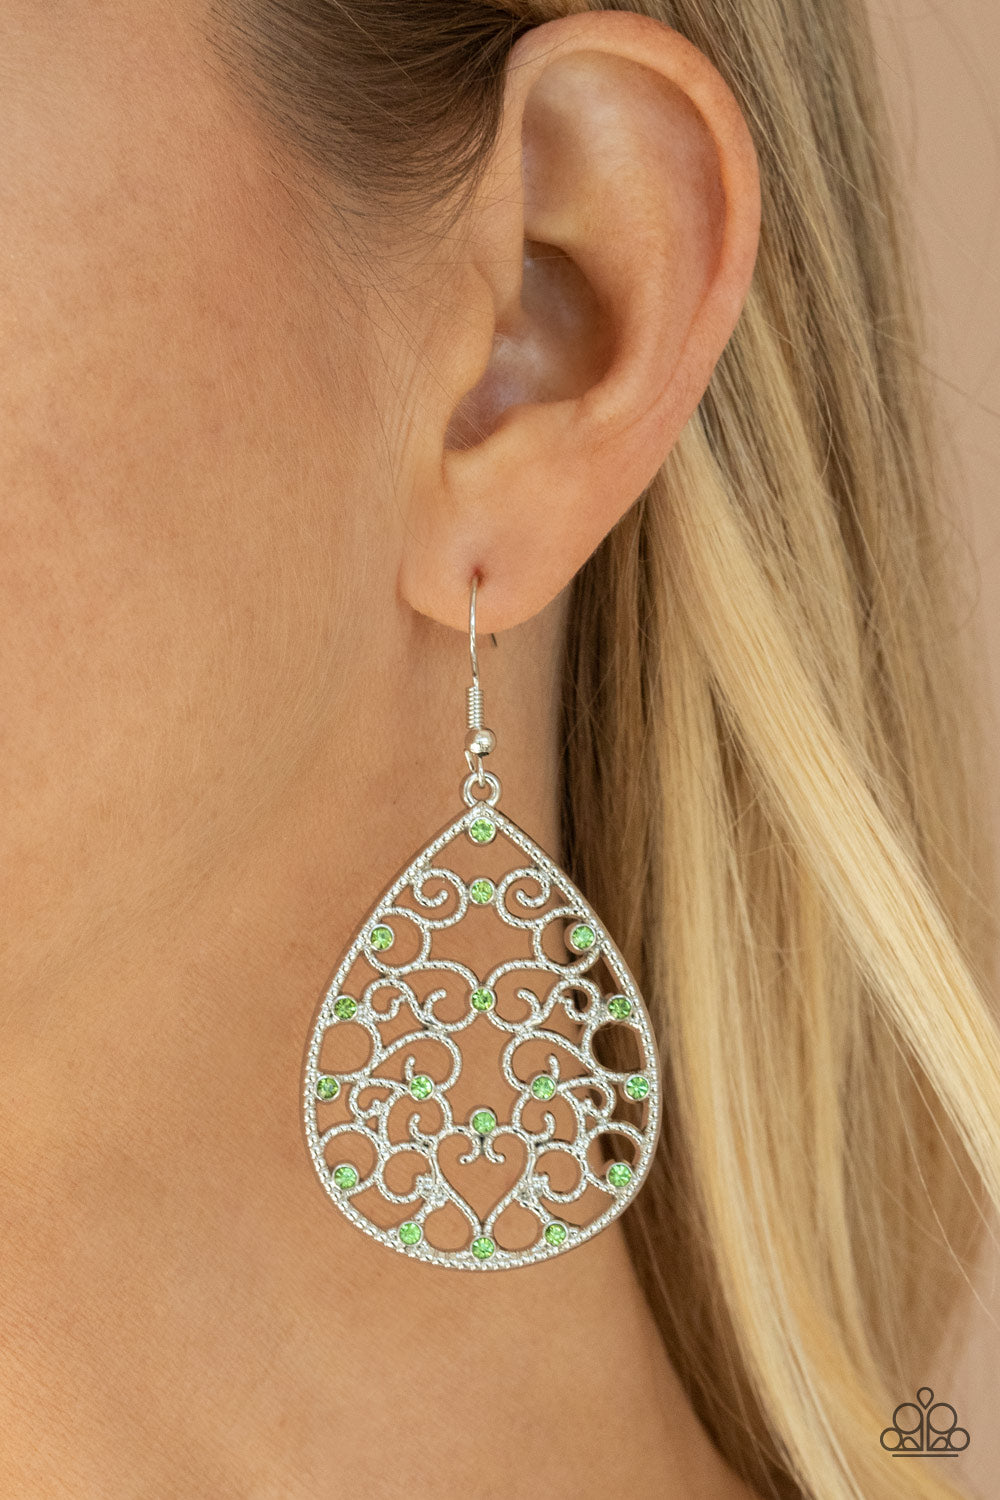 Midnight Carriage - Green Earrings